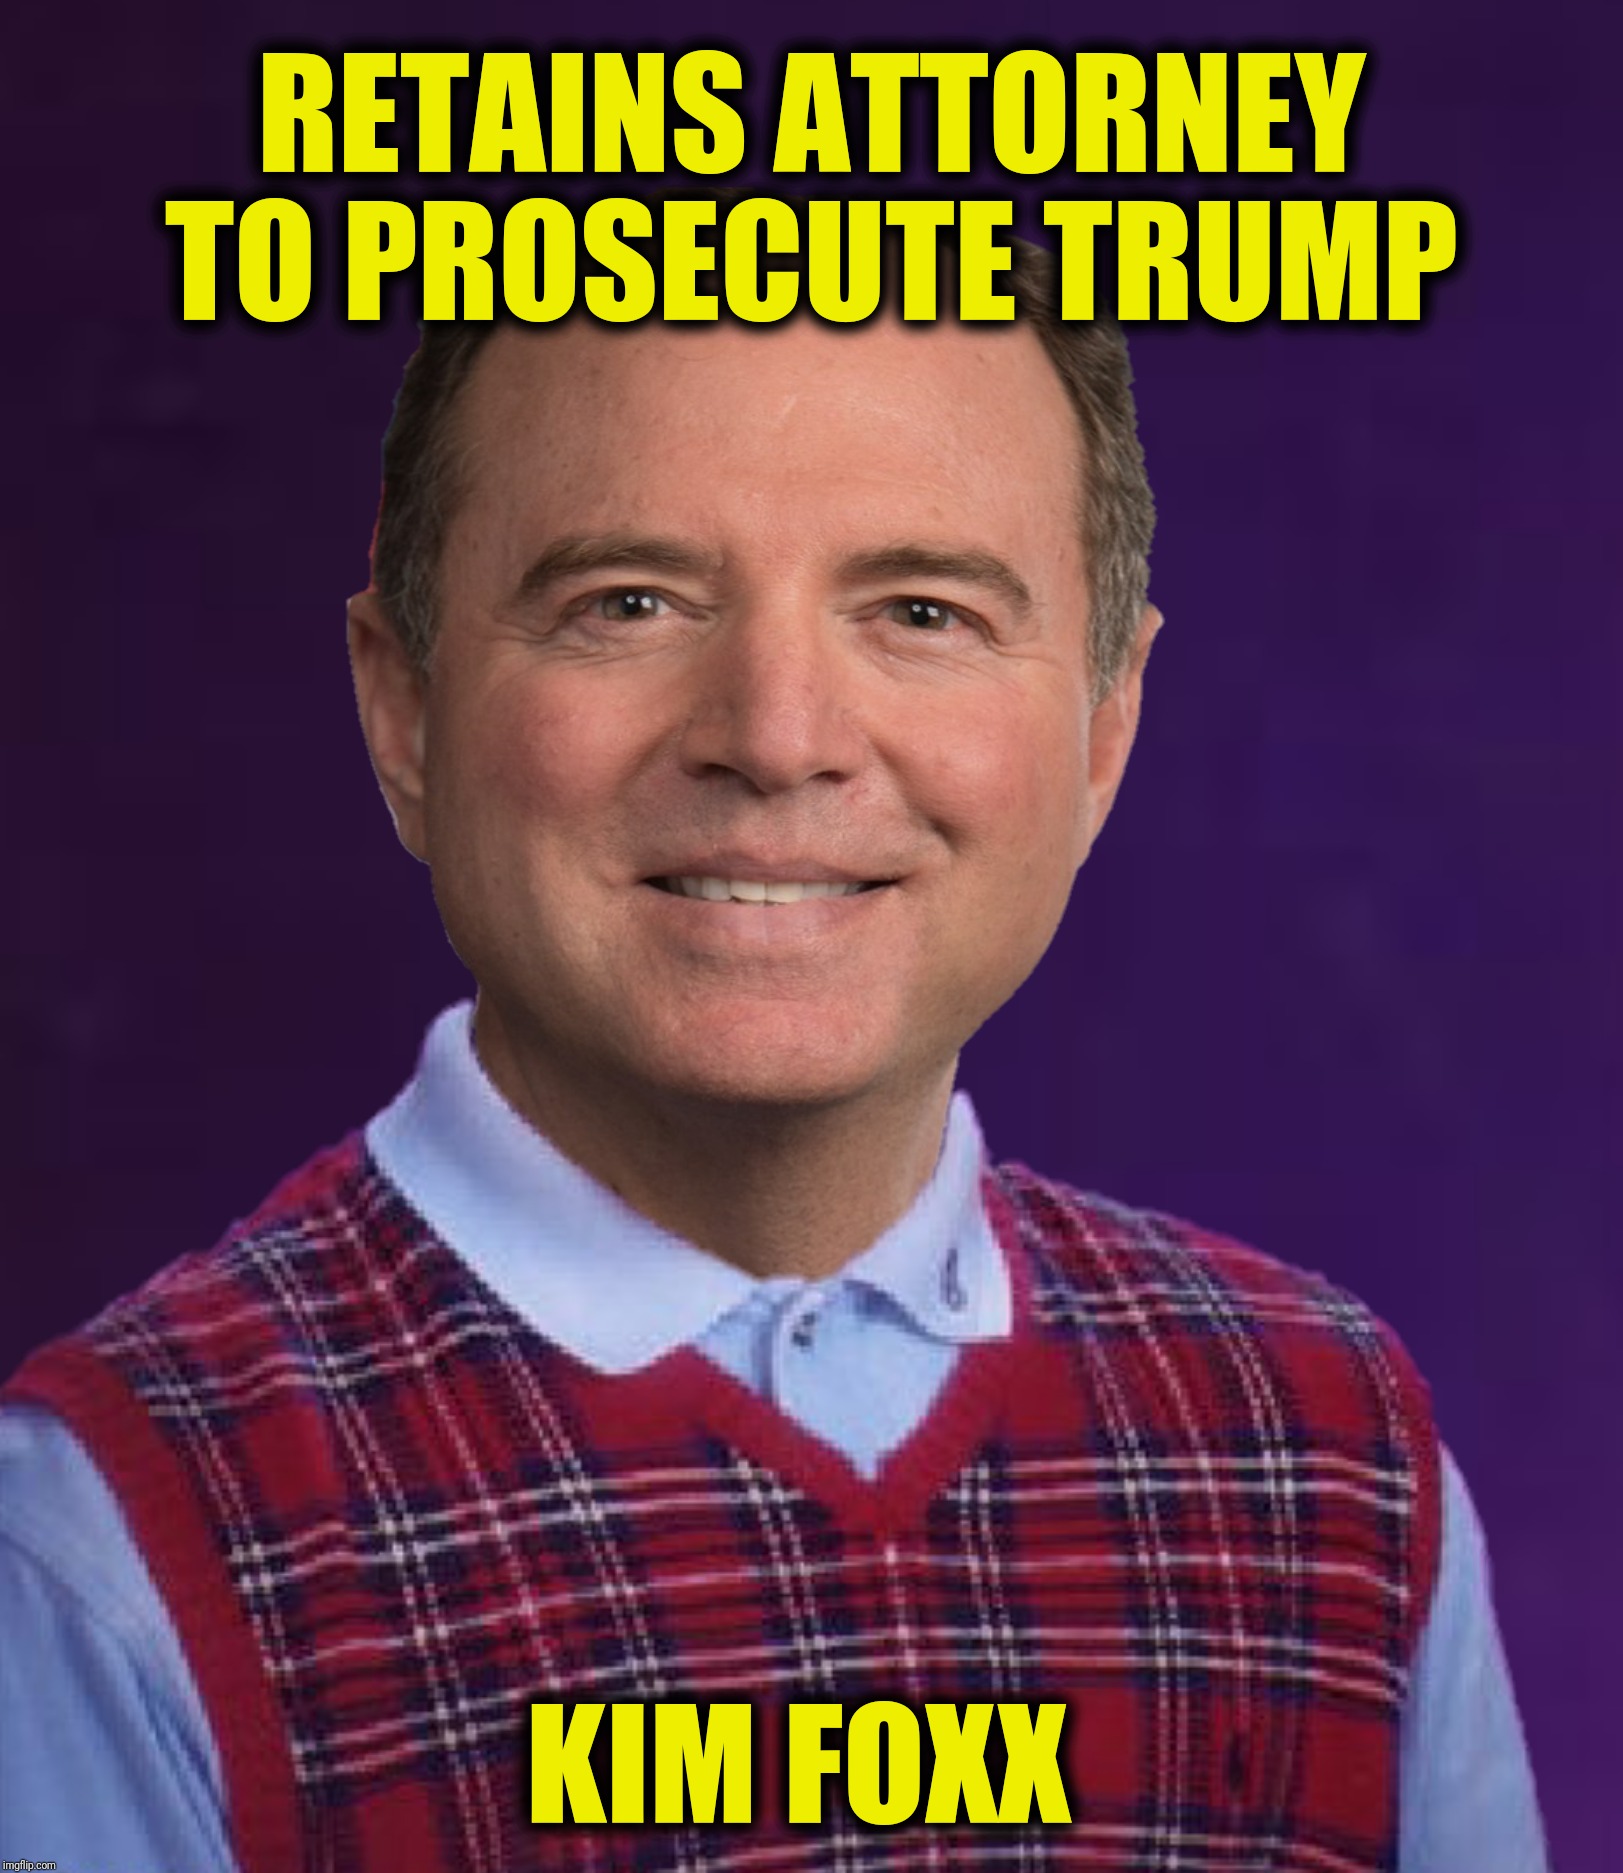 The face you make when all charges are dropped | RETAINS ATTORNEY TO PROSECUTE TRUMP; KIM FOXX | image tagged in bad luck brian,adam schiff,kim foxx,attorney,prosecutor | made w/ Imgflip meme maker